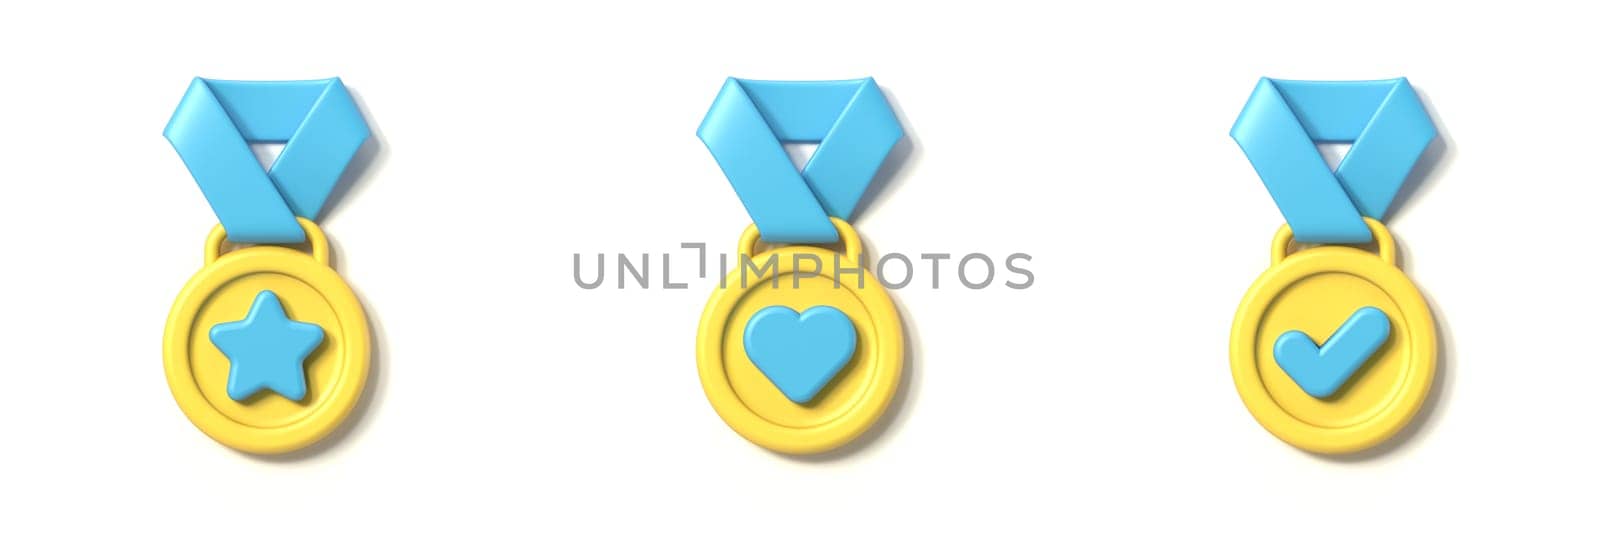 Star, heart and check mark medal icon 3D rendering illustration isolated on white background